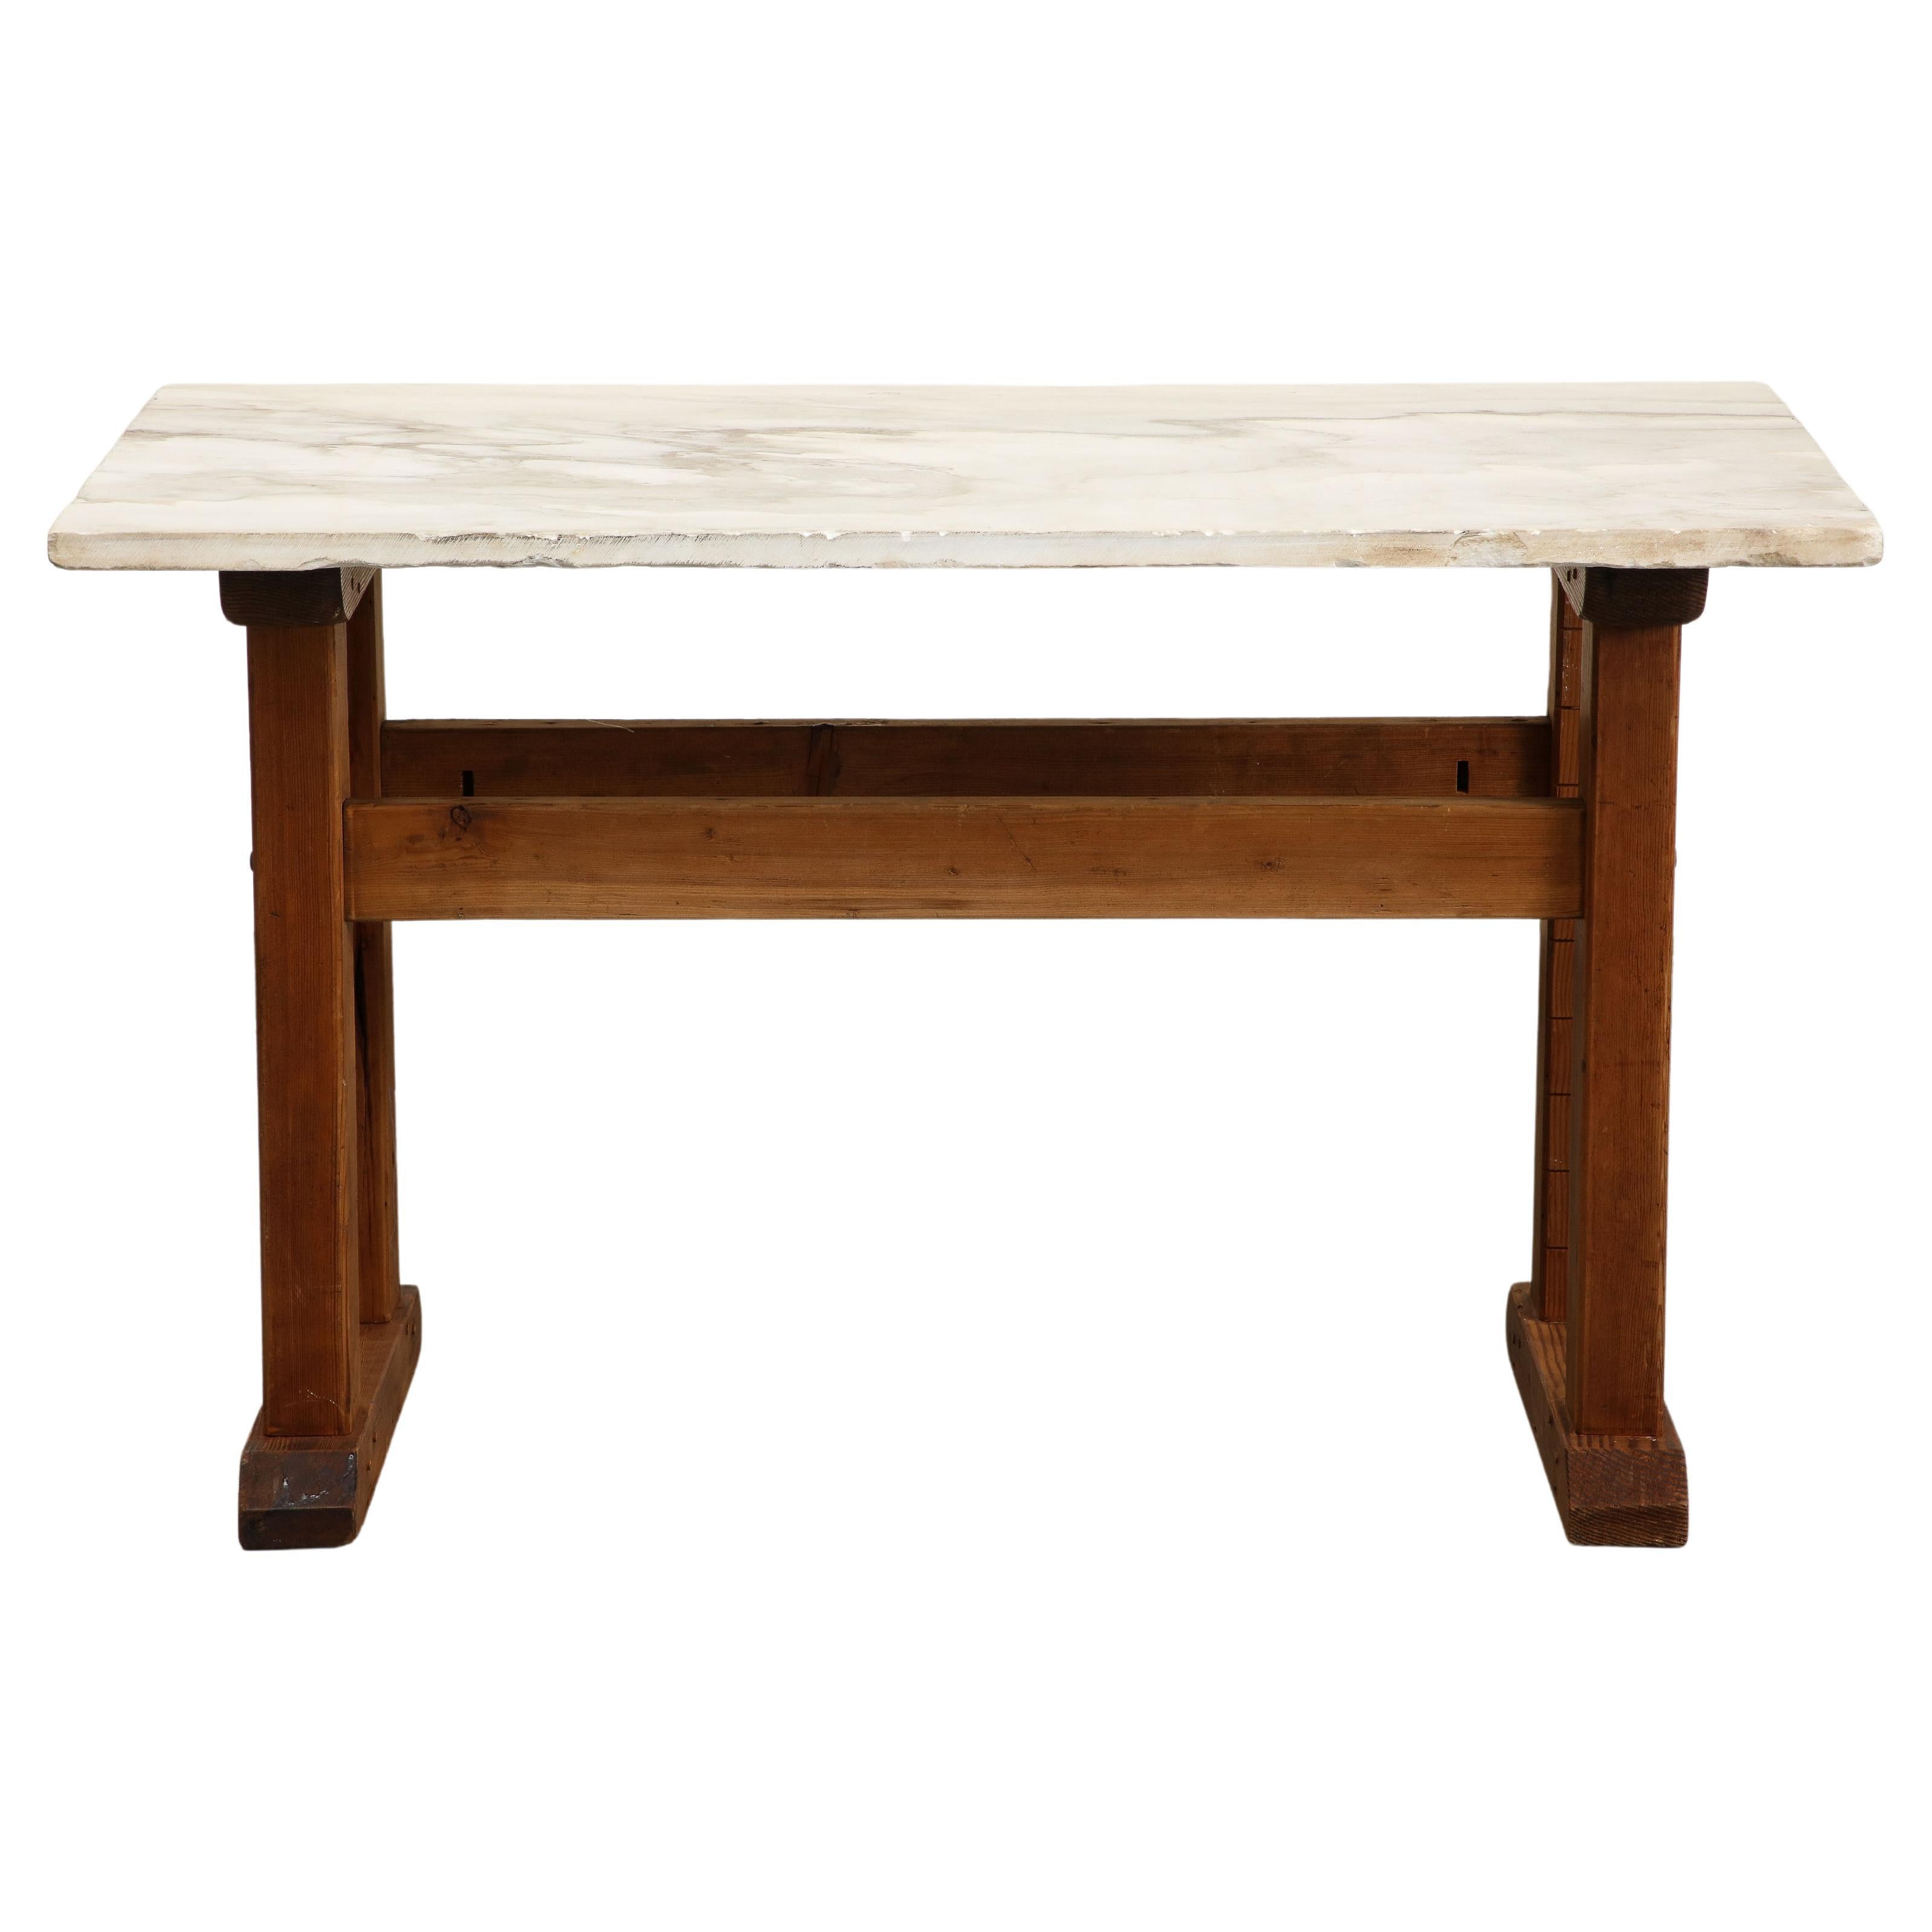 Elegant French rustic hall table or console with oak base and white marble top, Art Deco period / early 20th century. Simple lines.